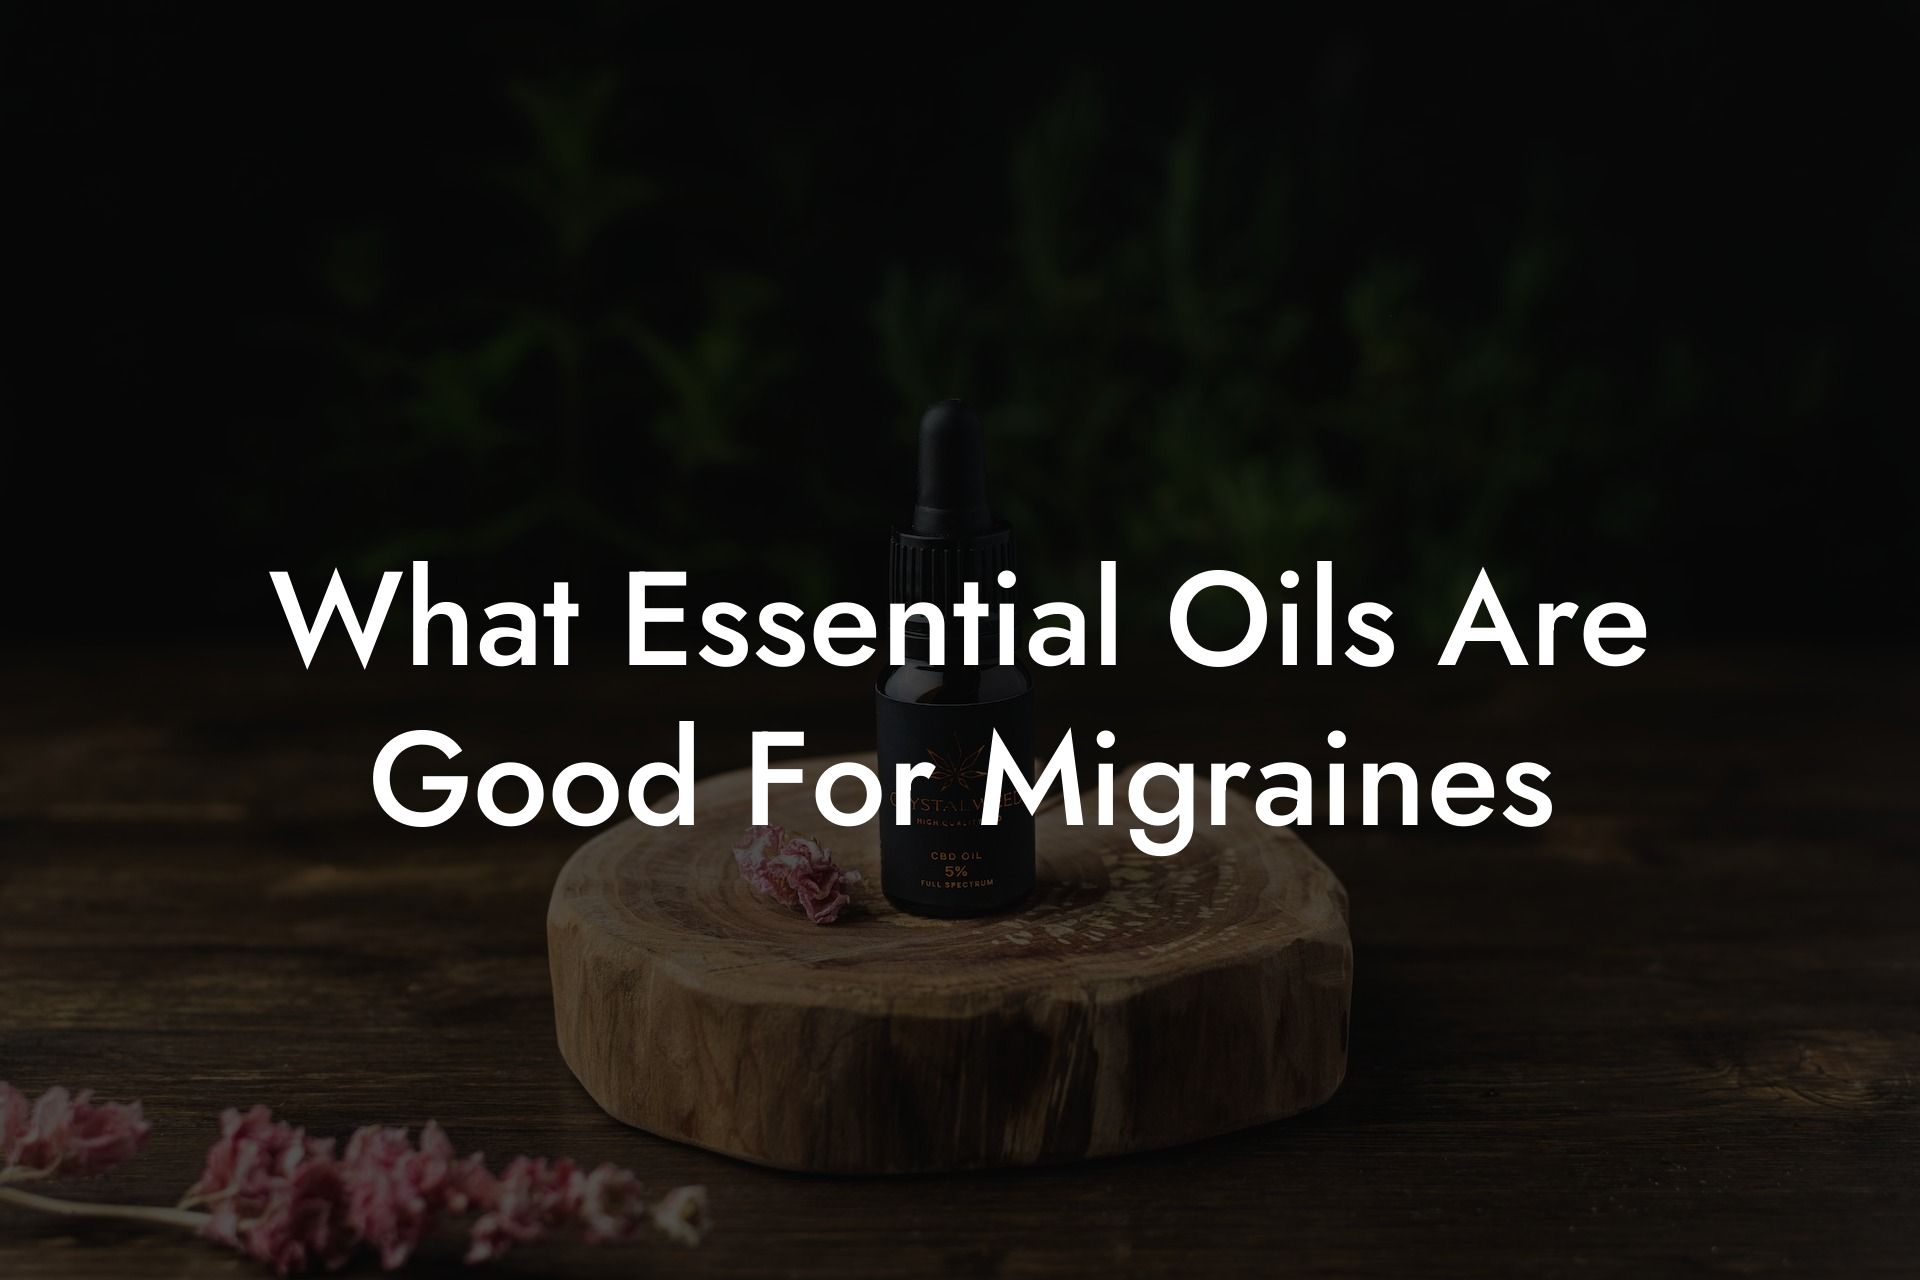 What Essential Oils Are Good For Migraines